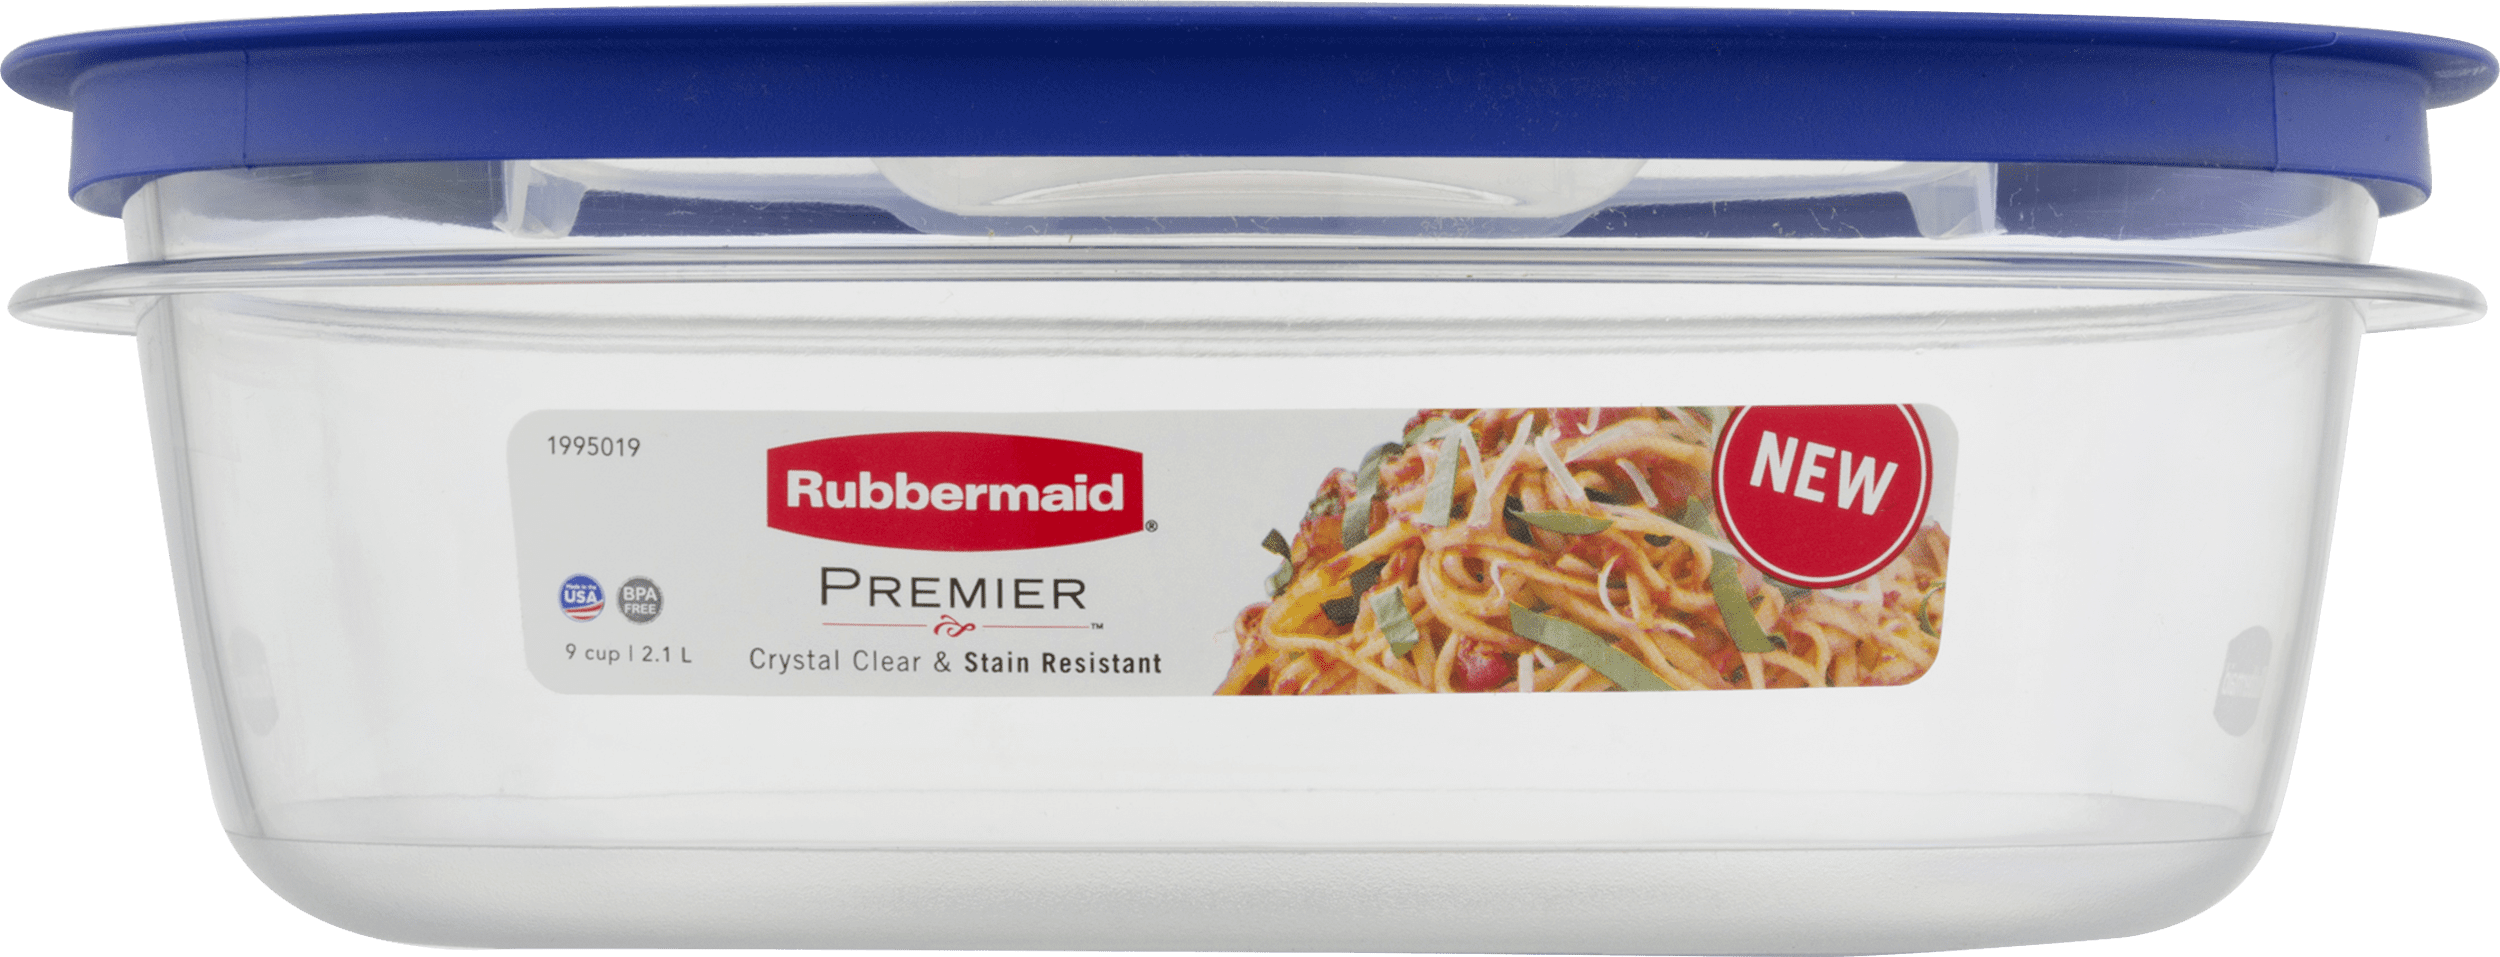 Rubbermaid Premier Easy Find Lids Food Storage Container, 9 Cup, Purple  1812439,  price tracker / tracking,  price history charts,   price watches,  price drop alerts